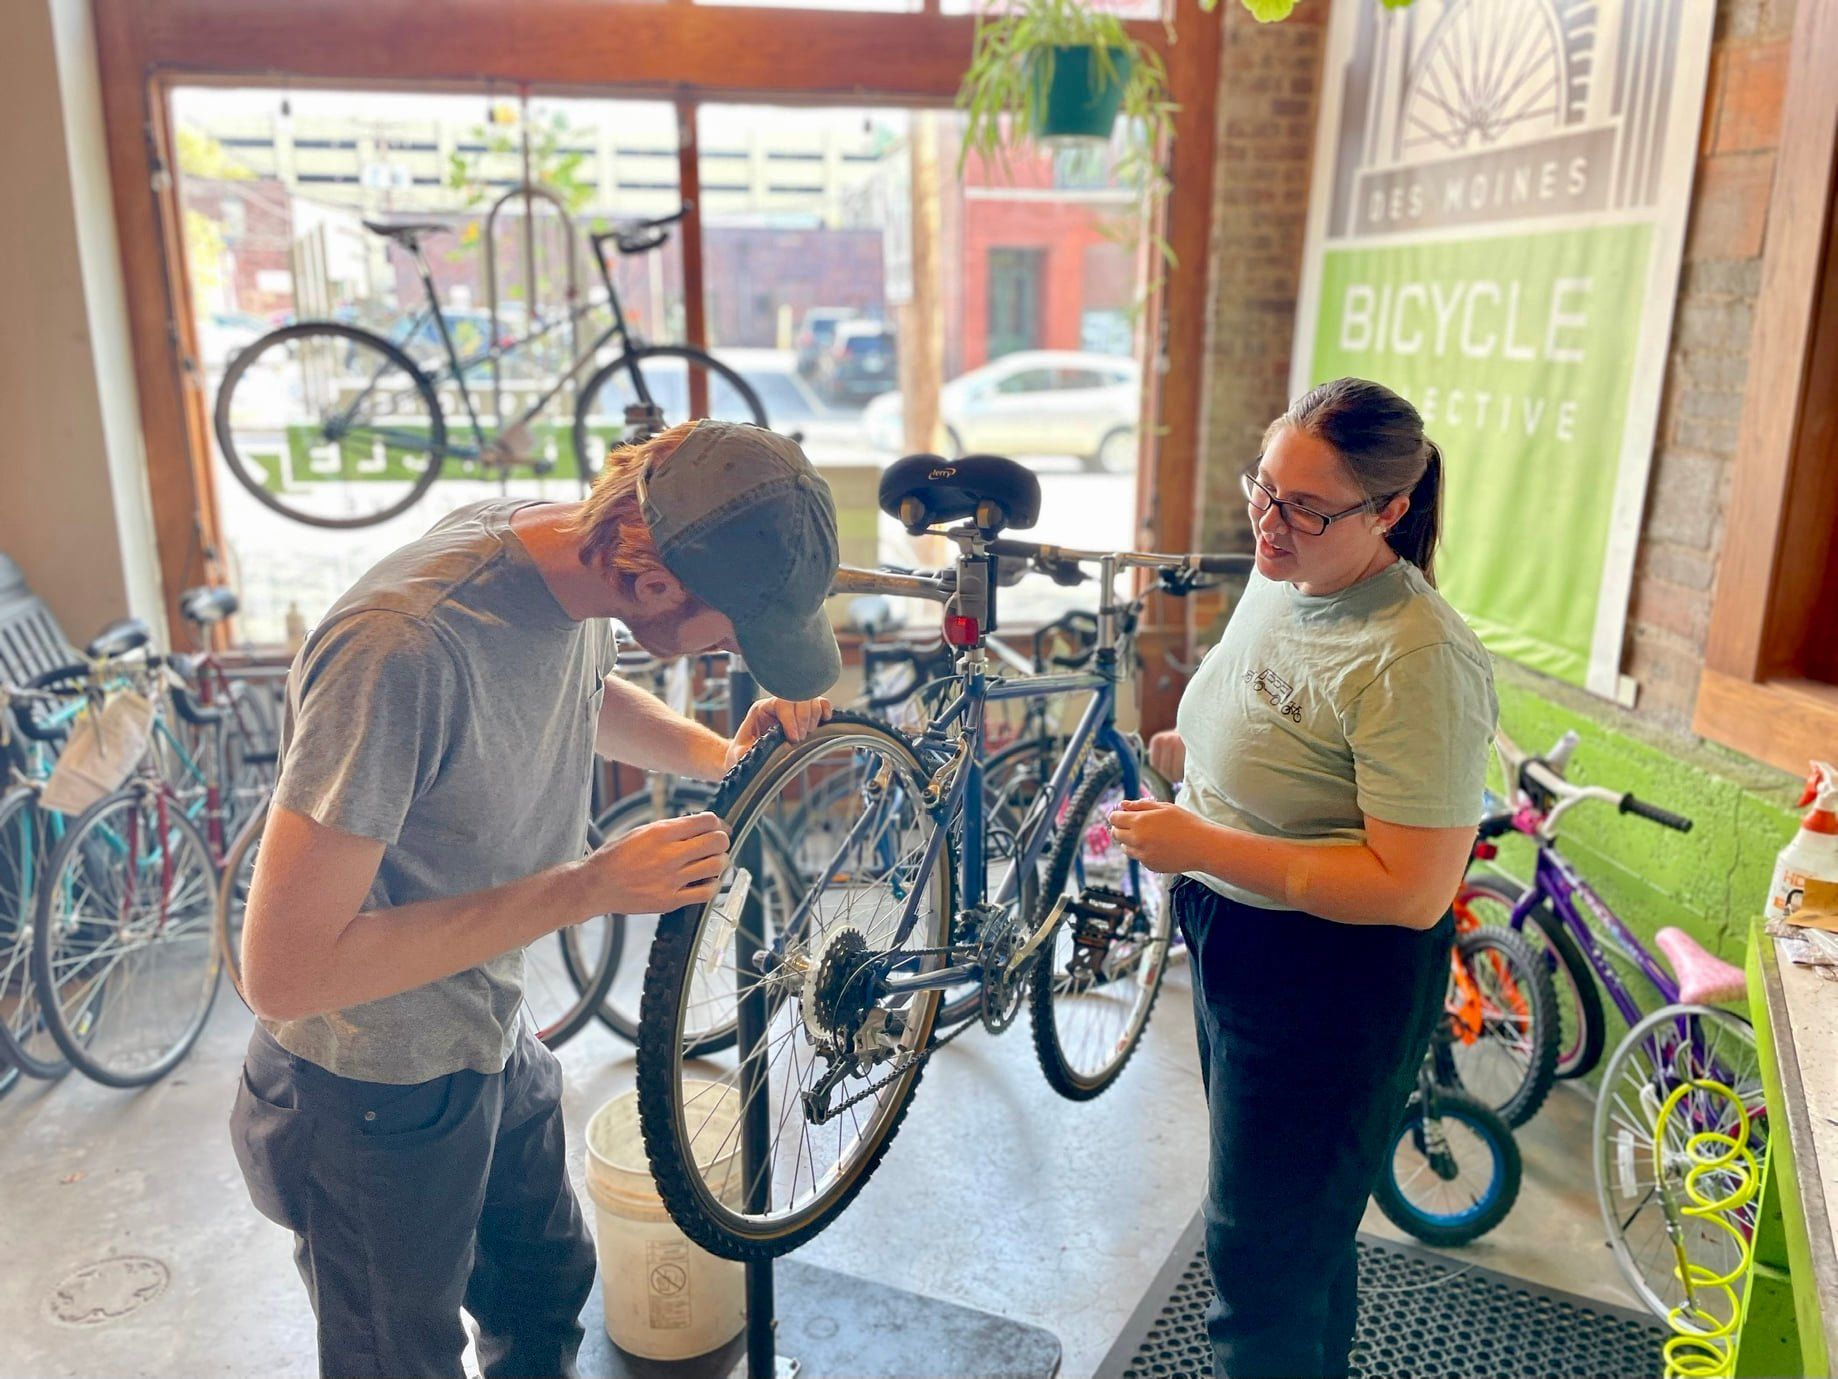 Des Moines Bicycle Collective